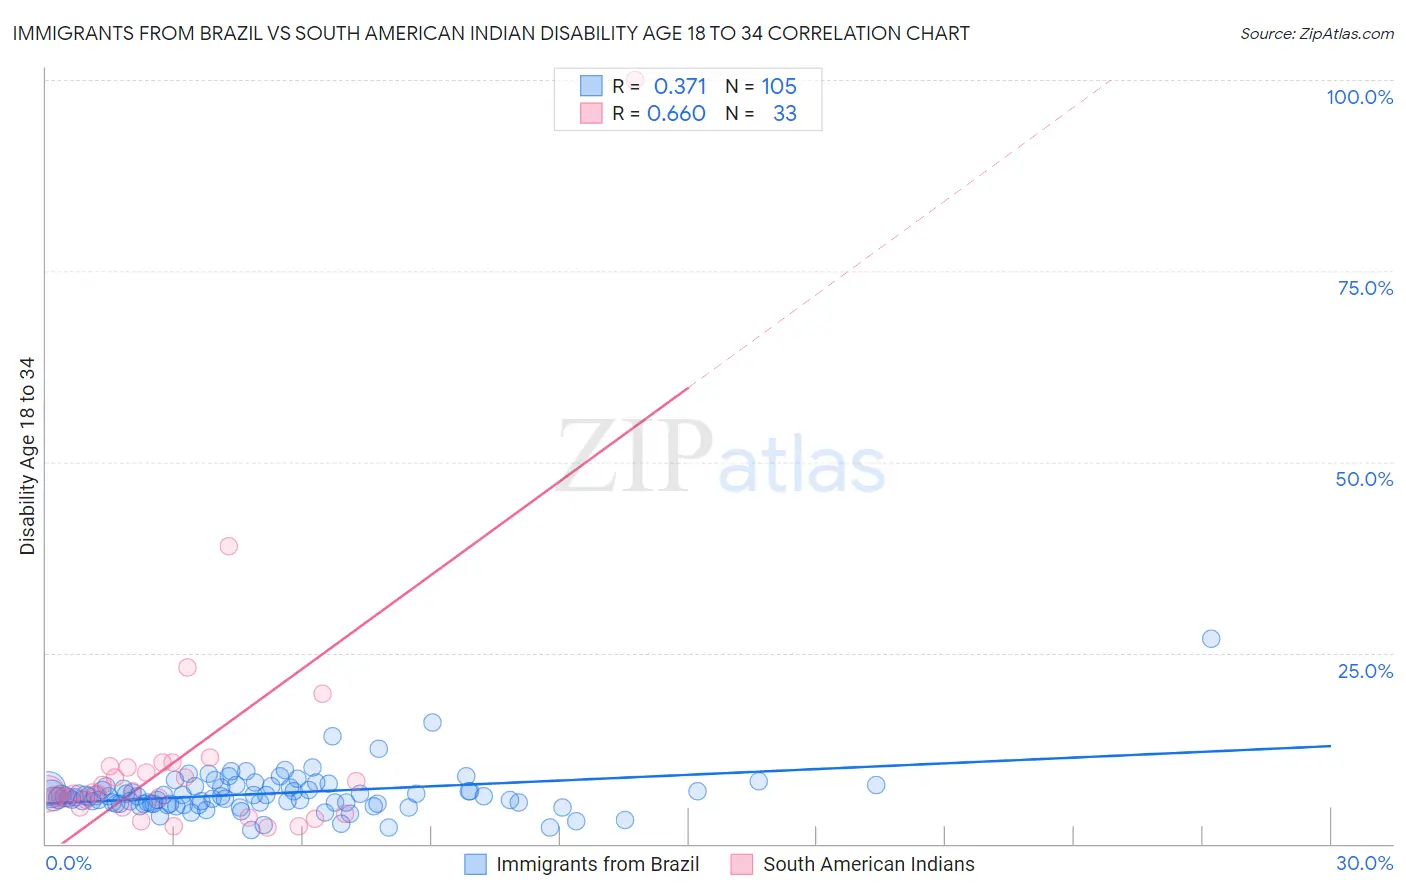 Immigrants from Brazil vs South American Indian Disability Age 18 to 34